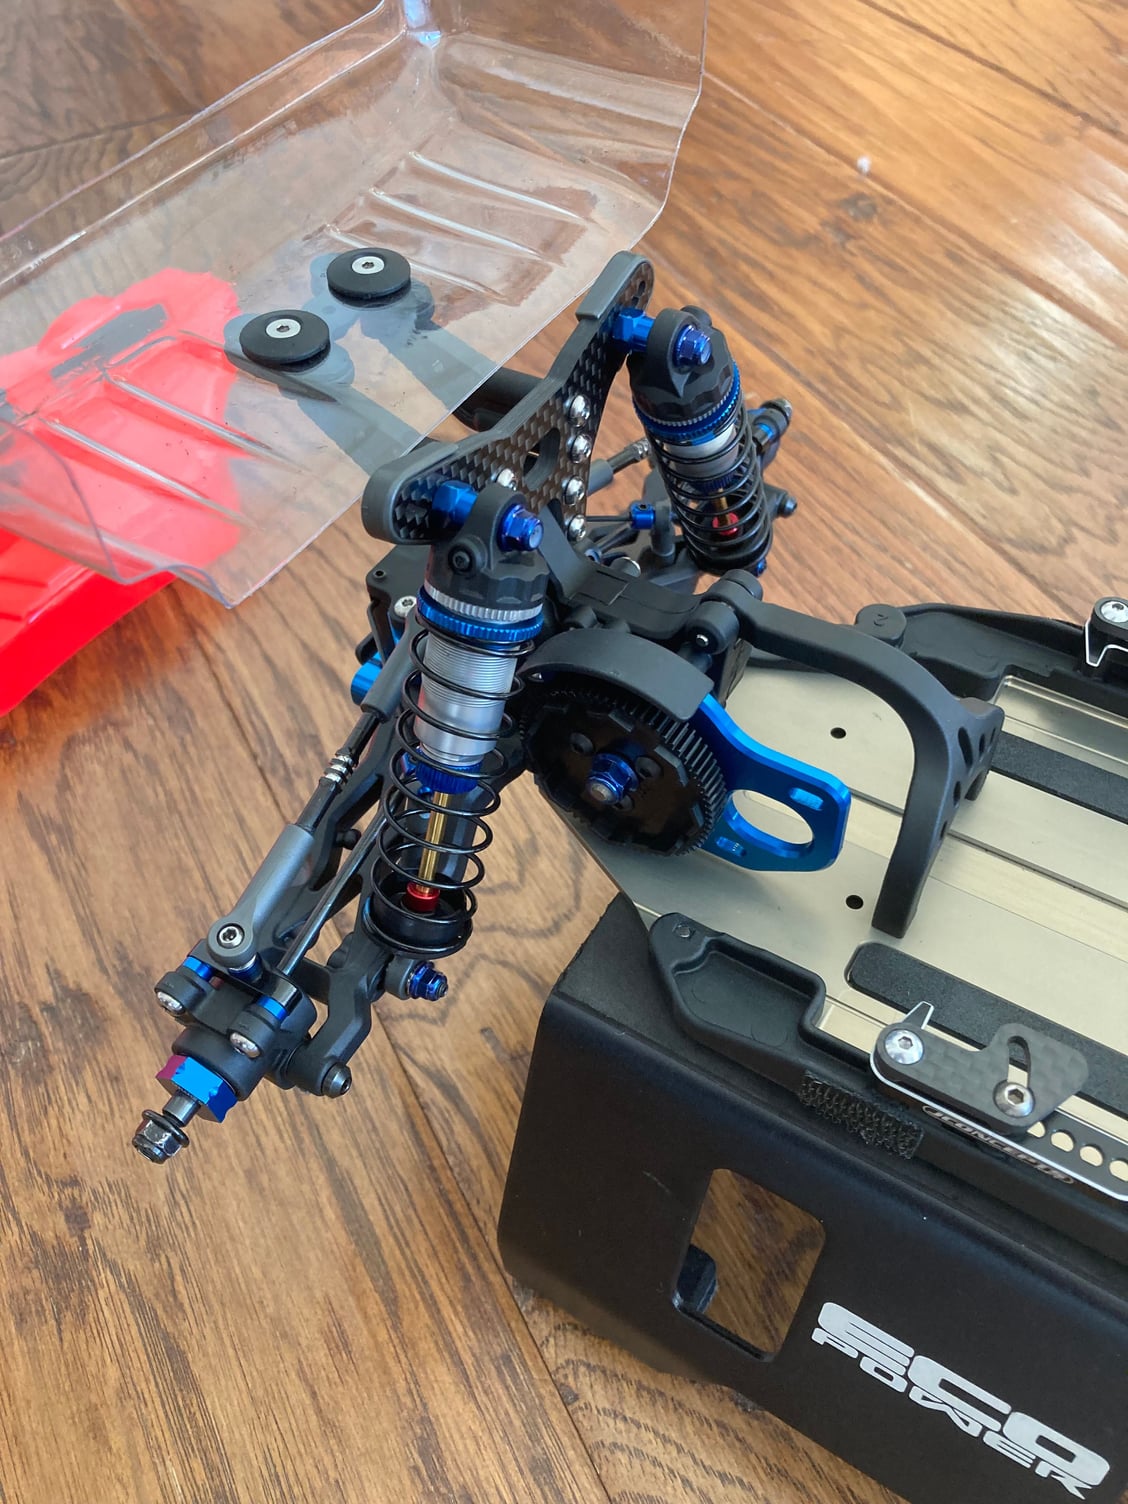 Associated B6.4 with Tons of Upgrades - R/C Tech Forums